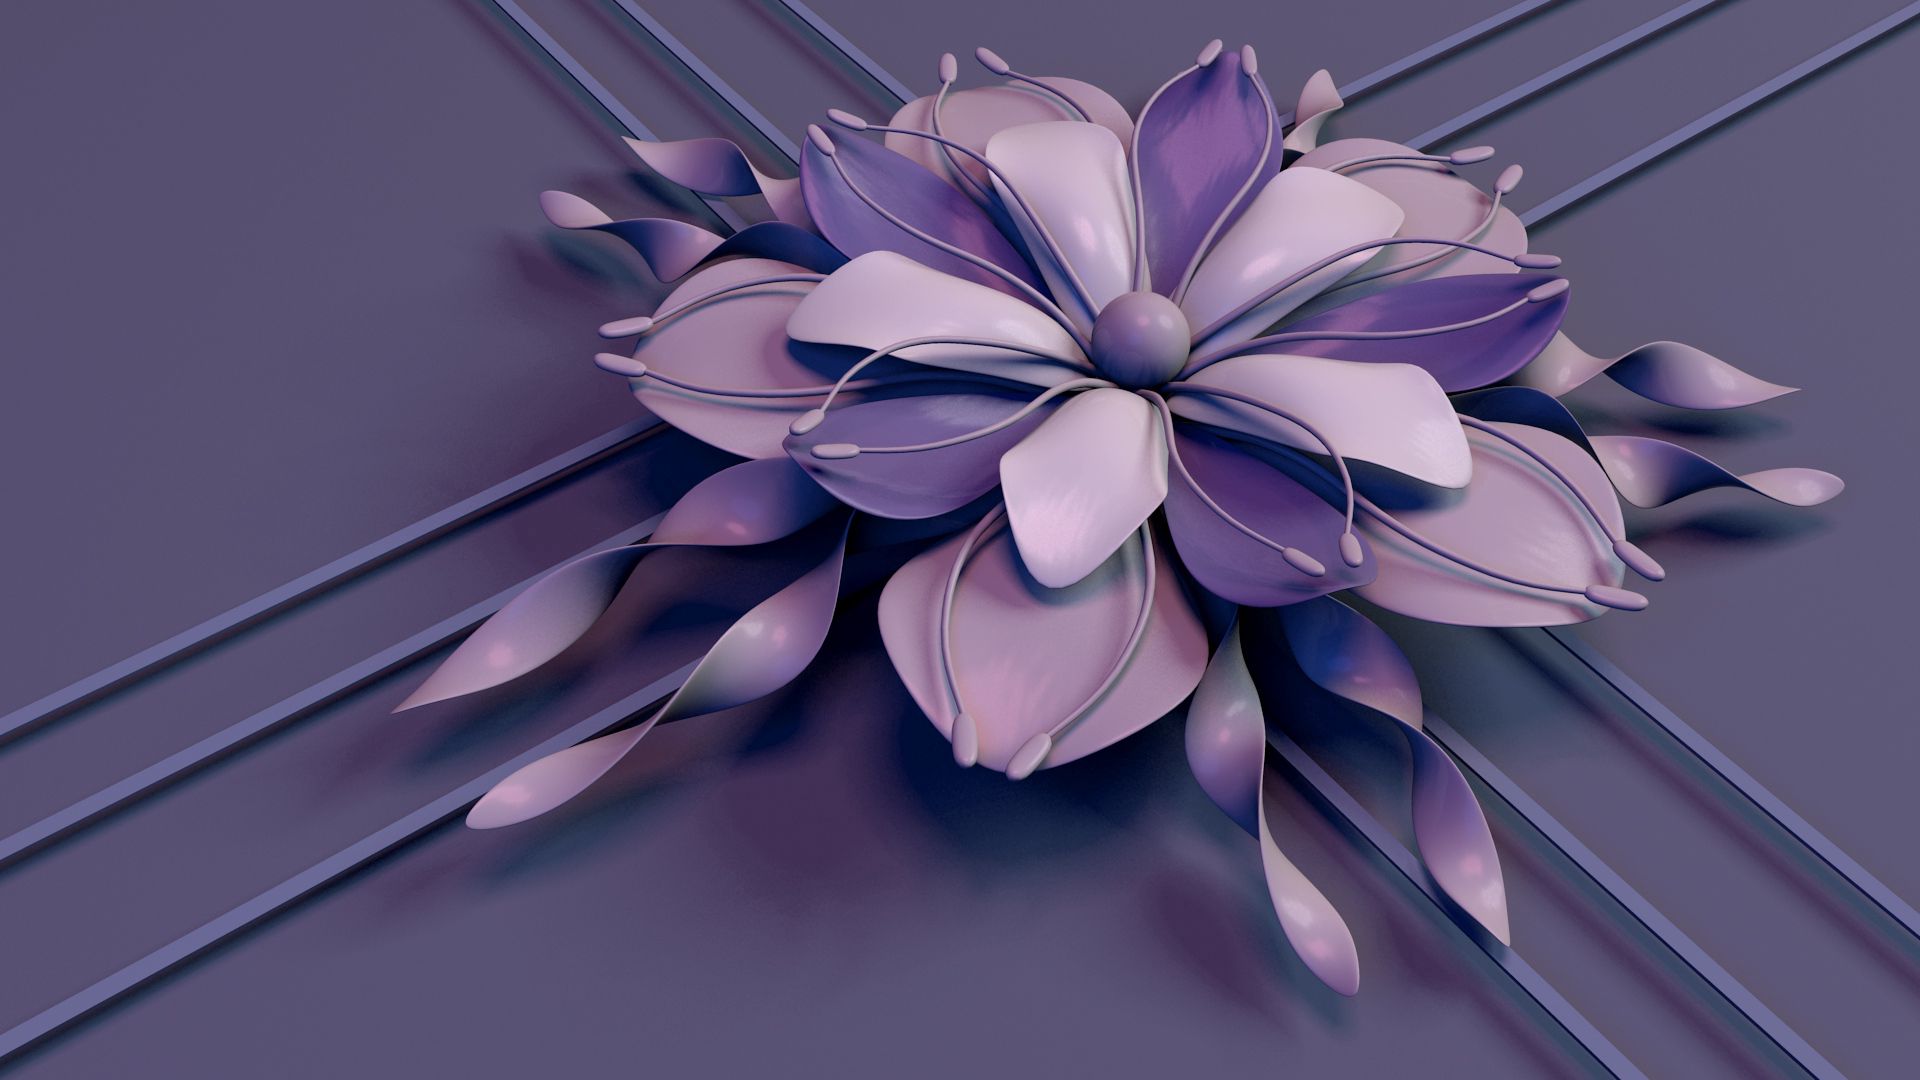 Cool Flower Backgrounds